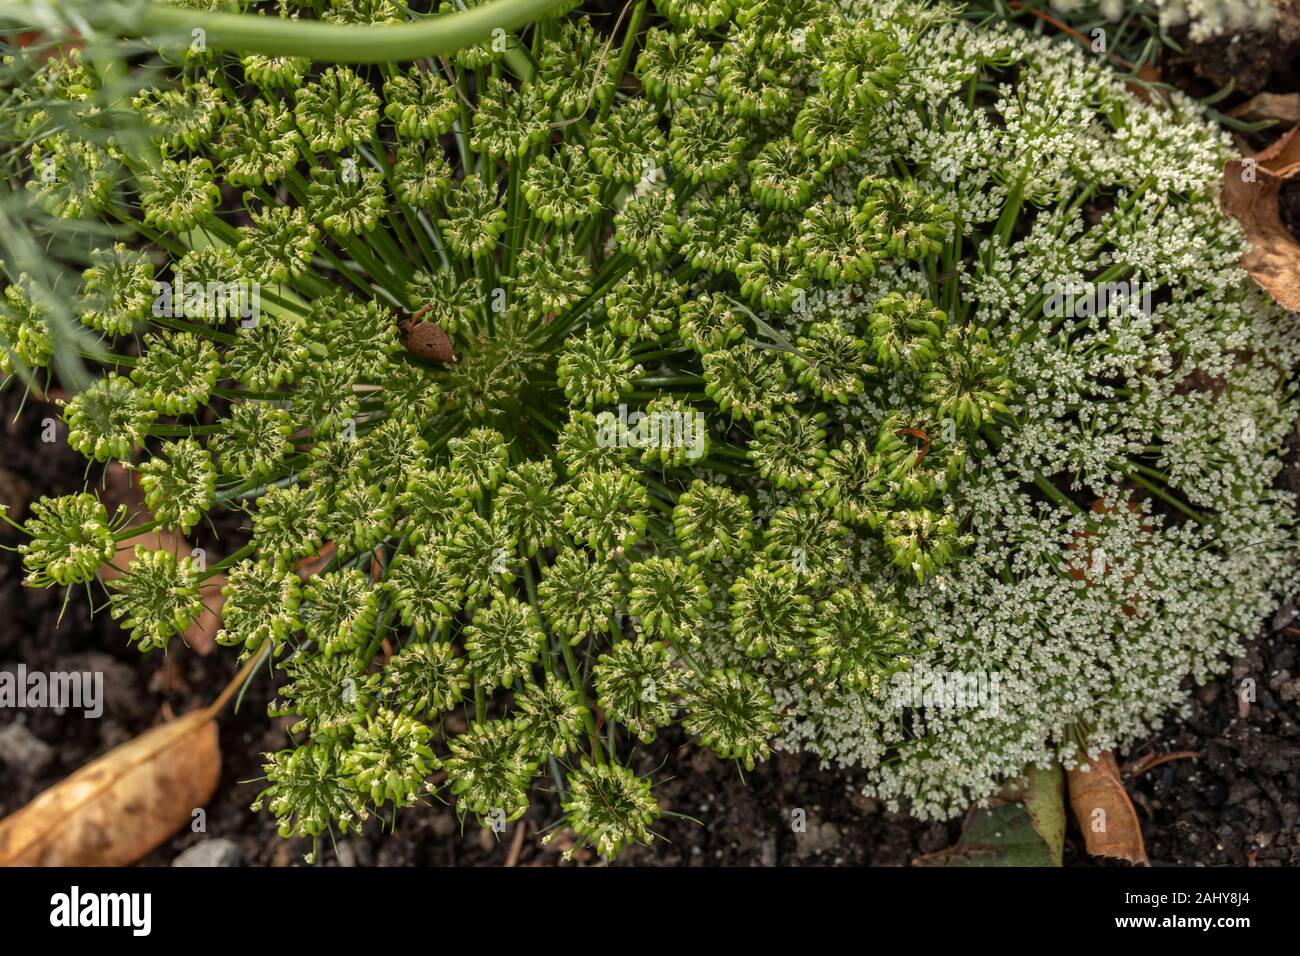 toothpick-plant, Ammi visnagi 'white', in flower and fruit. Stock Photo